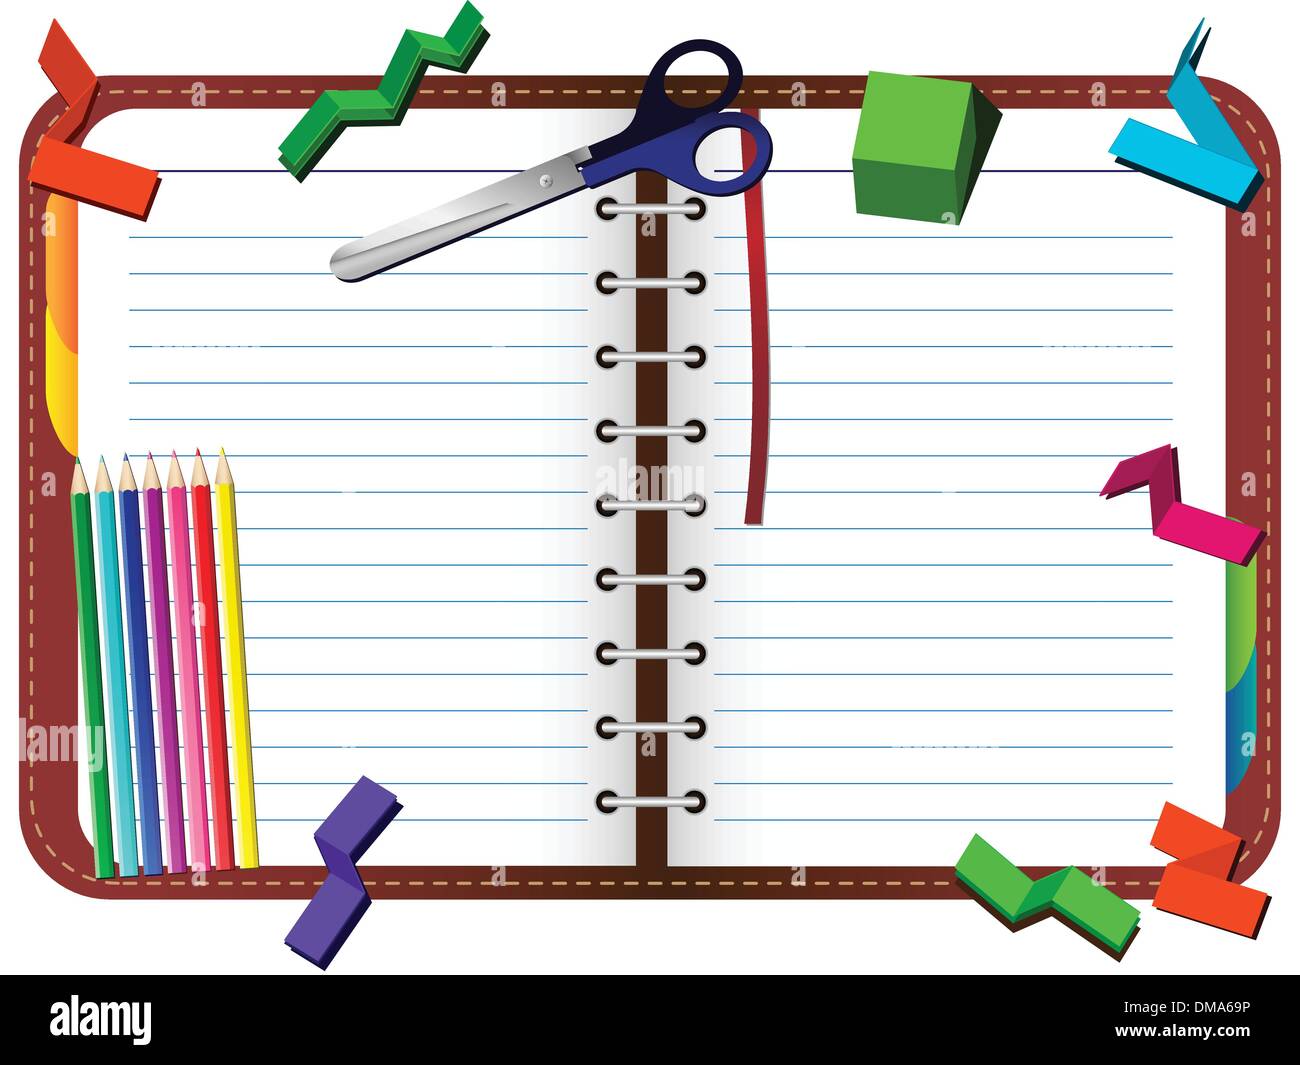 Organizer with pencils, scissors and paper pieces set Stock Vector